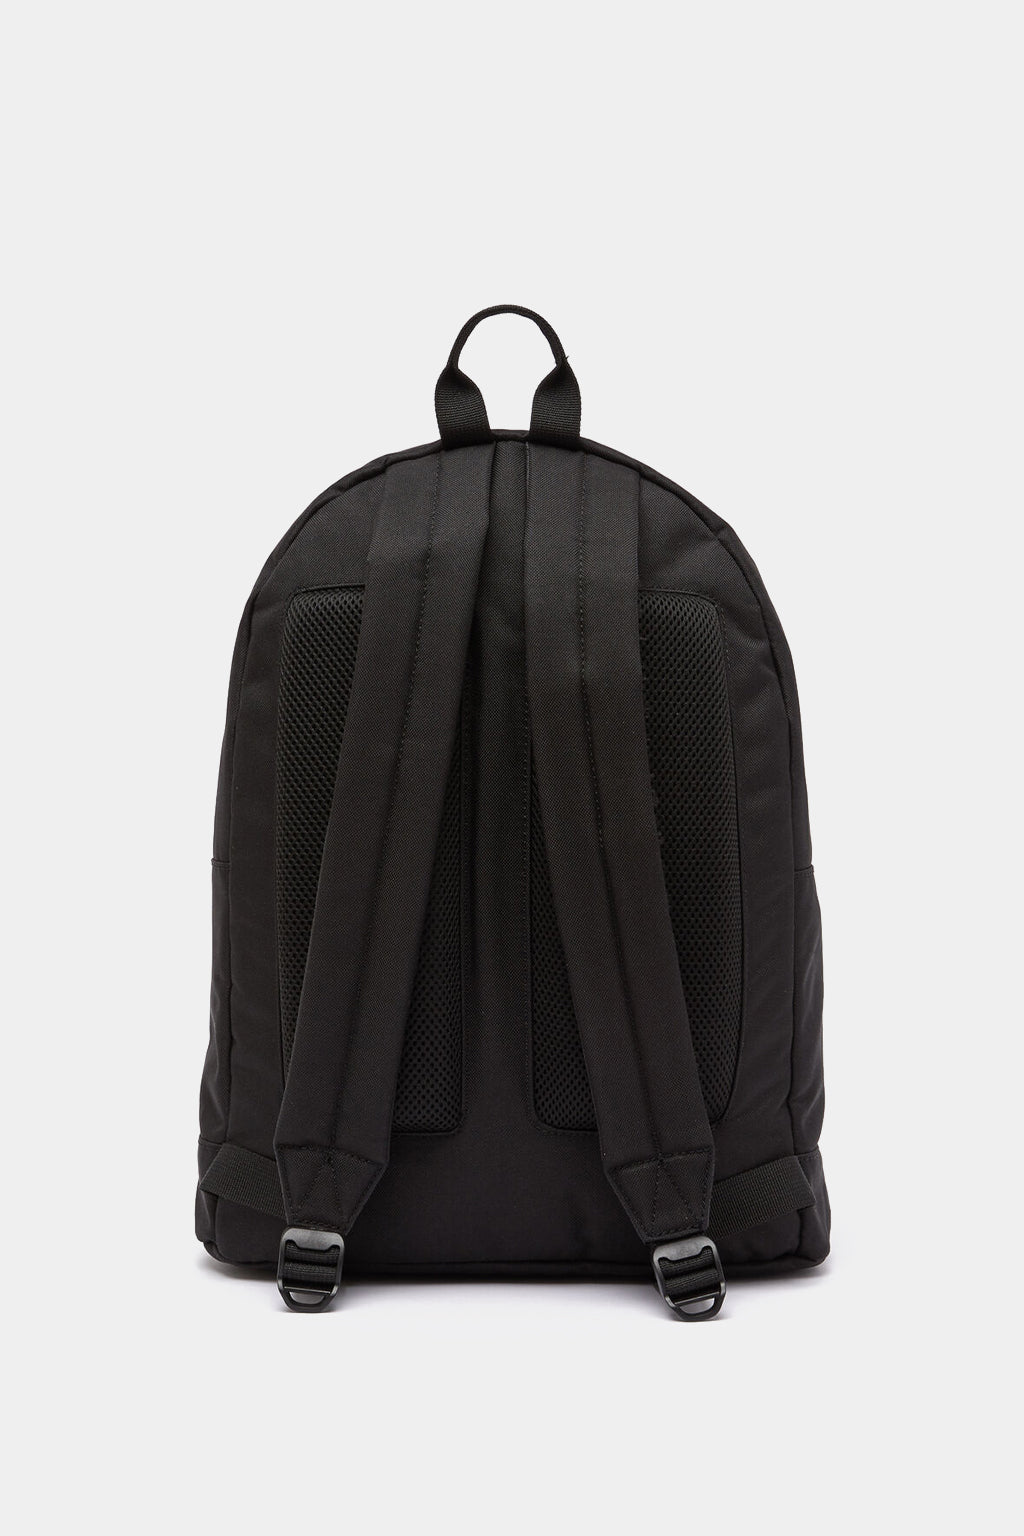 Lacoste - Unisex Computer Compartment Backpack